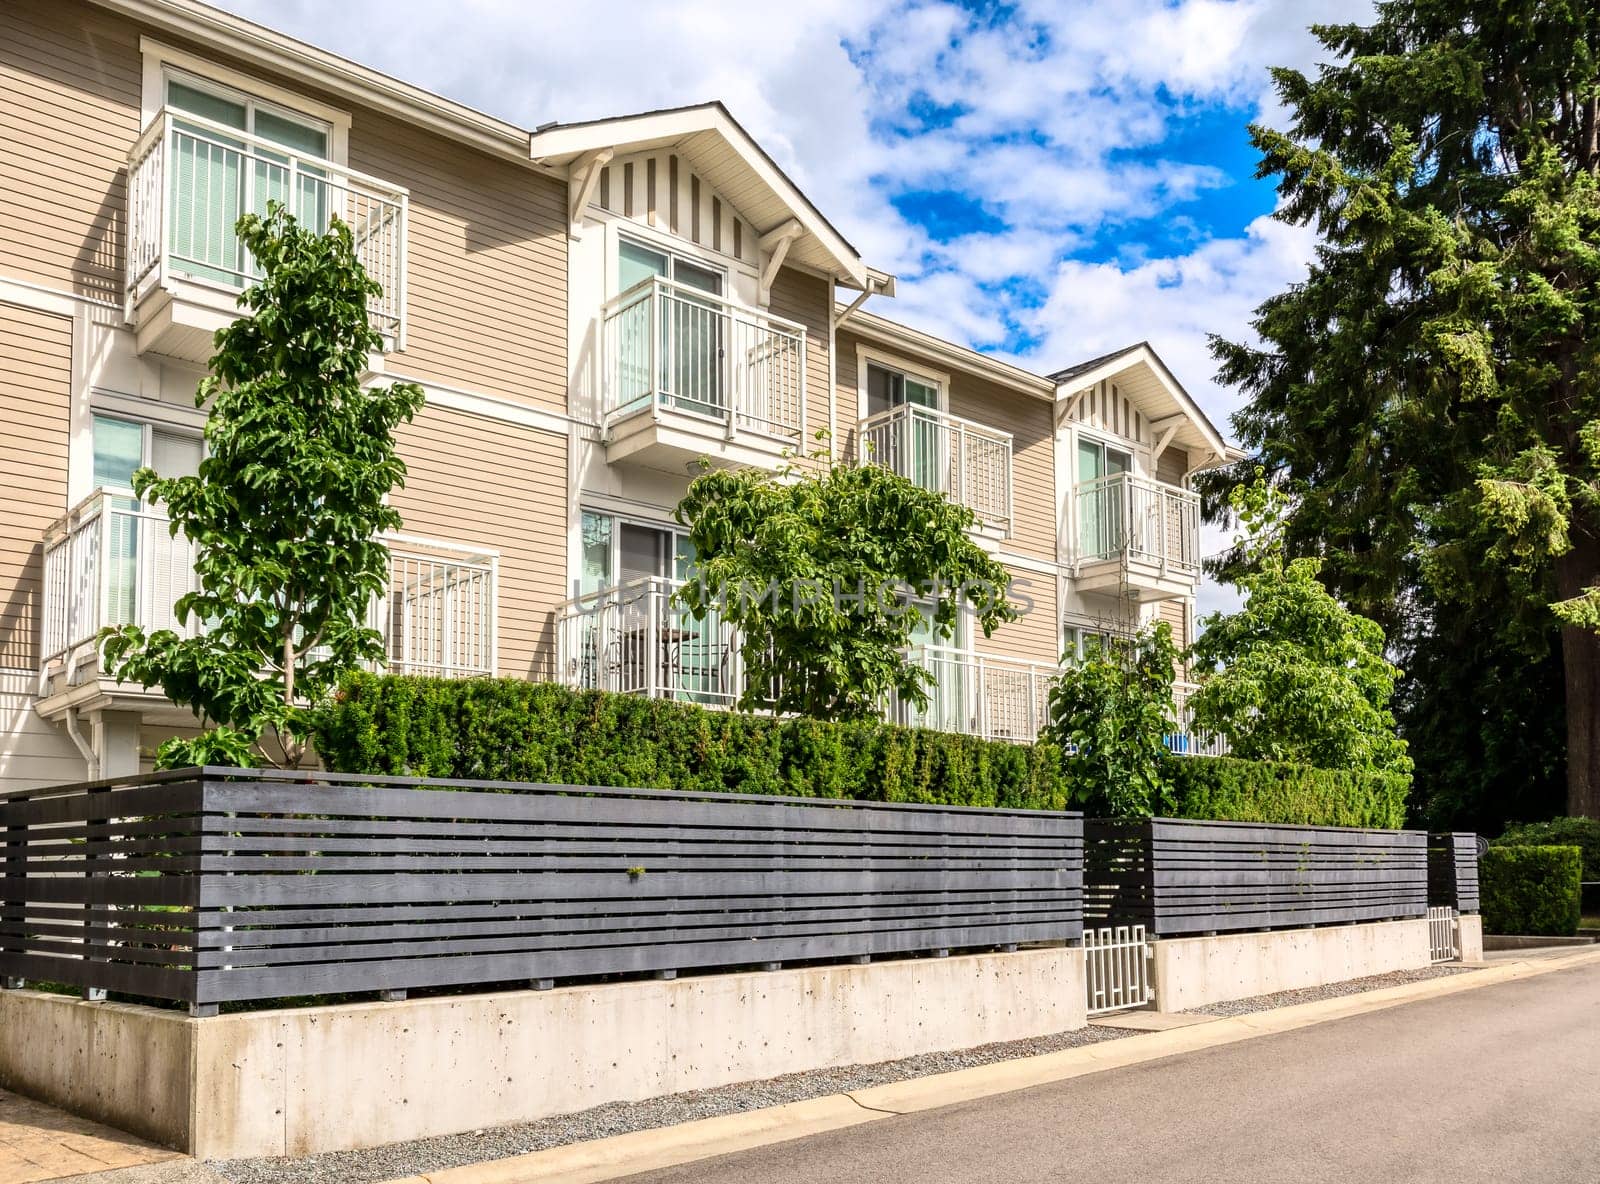 Residential condo building with fenced front yard on bright sunny day in British Columbia